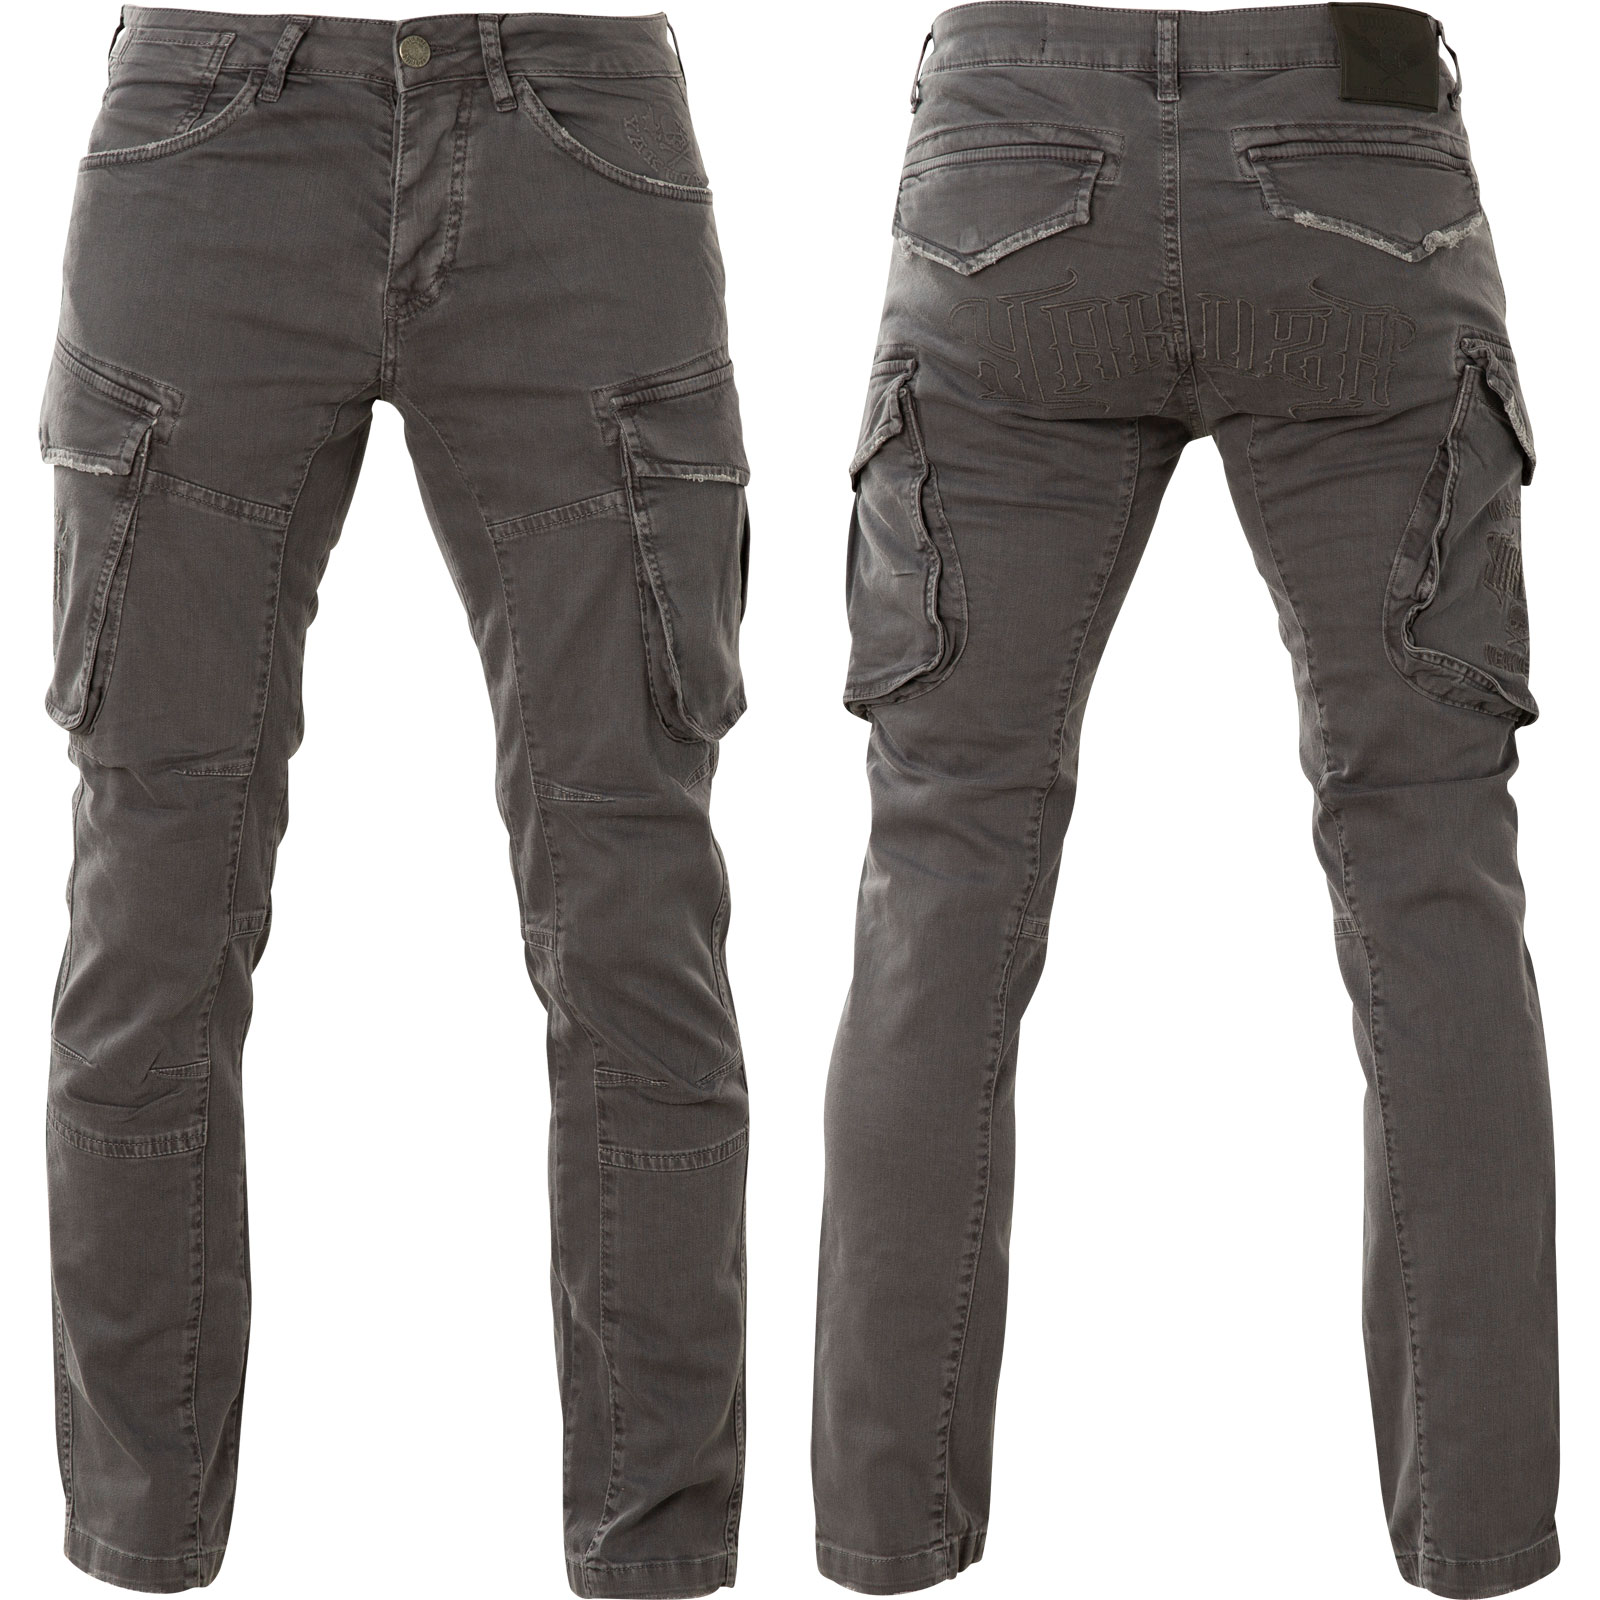 Yakuza Core Cargo Pants CPB-15010 in grey with logo embroidery